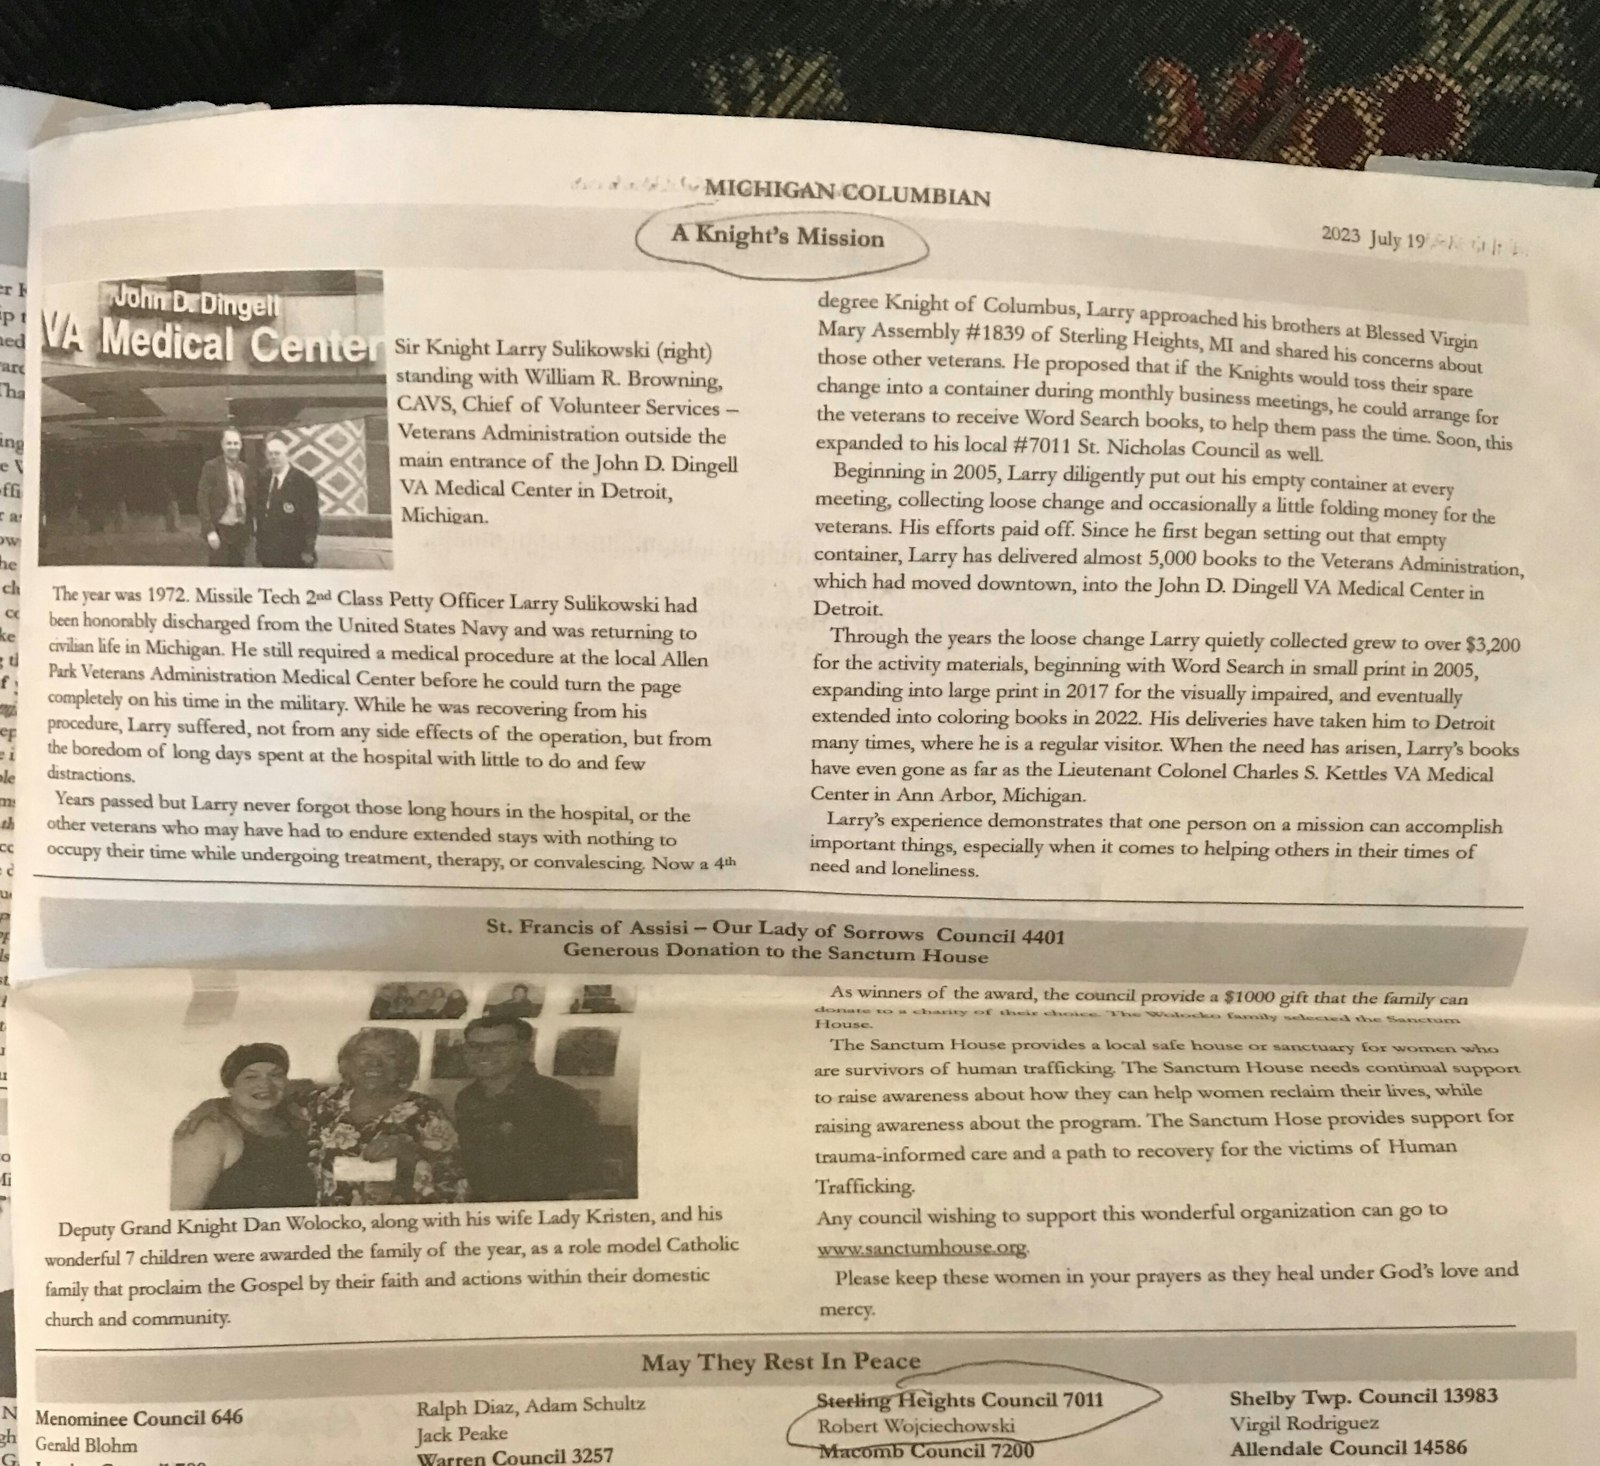 An article about Larry Sulikowski’s donations for veterans was published in the Michigan Colombian, a publication of the Knights of Columbus. (Kelly Luttinen | Special to Detroit Catholic)